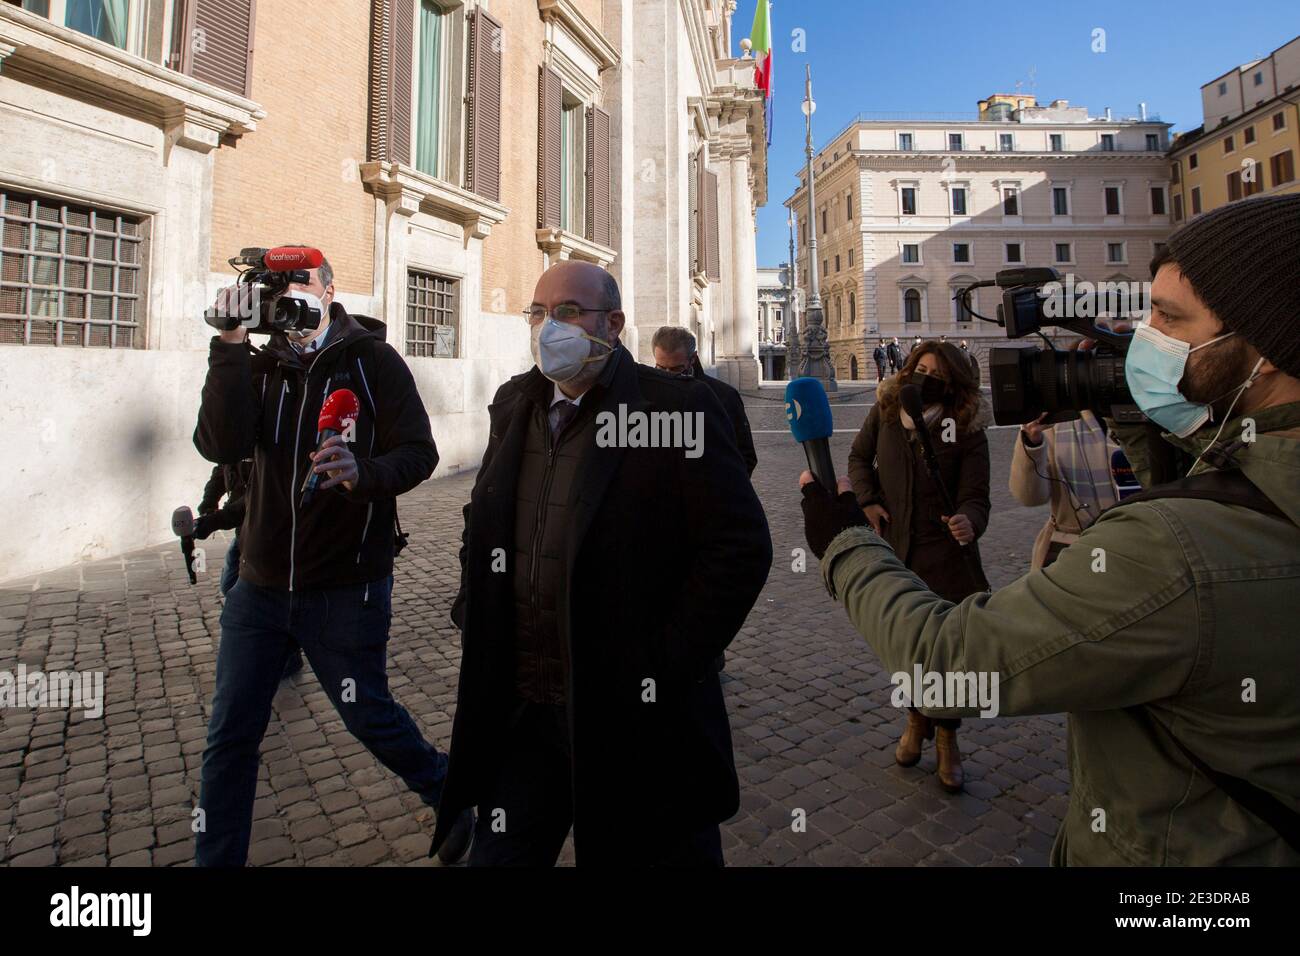 Rome Italy , January 18th 2021 Vito Crimi MP (Leader of Movimento 5 Stelle - 5 Star Movement).  Rome, 18/01/2021. Italian Members of Parliament outside the Chamber of Deputies (Italian Parliament lower house) while the Italian Prime Minister, Giuseppe Conte, asks the Chamber a vote of confidence to save the Italian Government after the defection of the two Cabinet ministers belonging to the tiny party, Italia Viva (Italy Alive), led by former Italian Prime Minister Matteo Renzi. Stock Photo